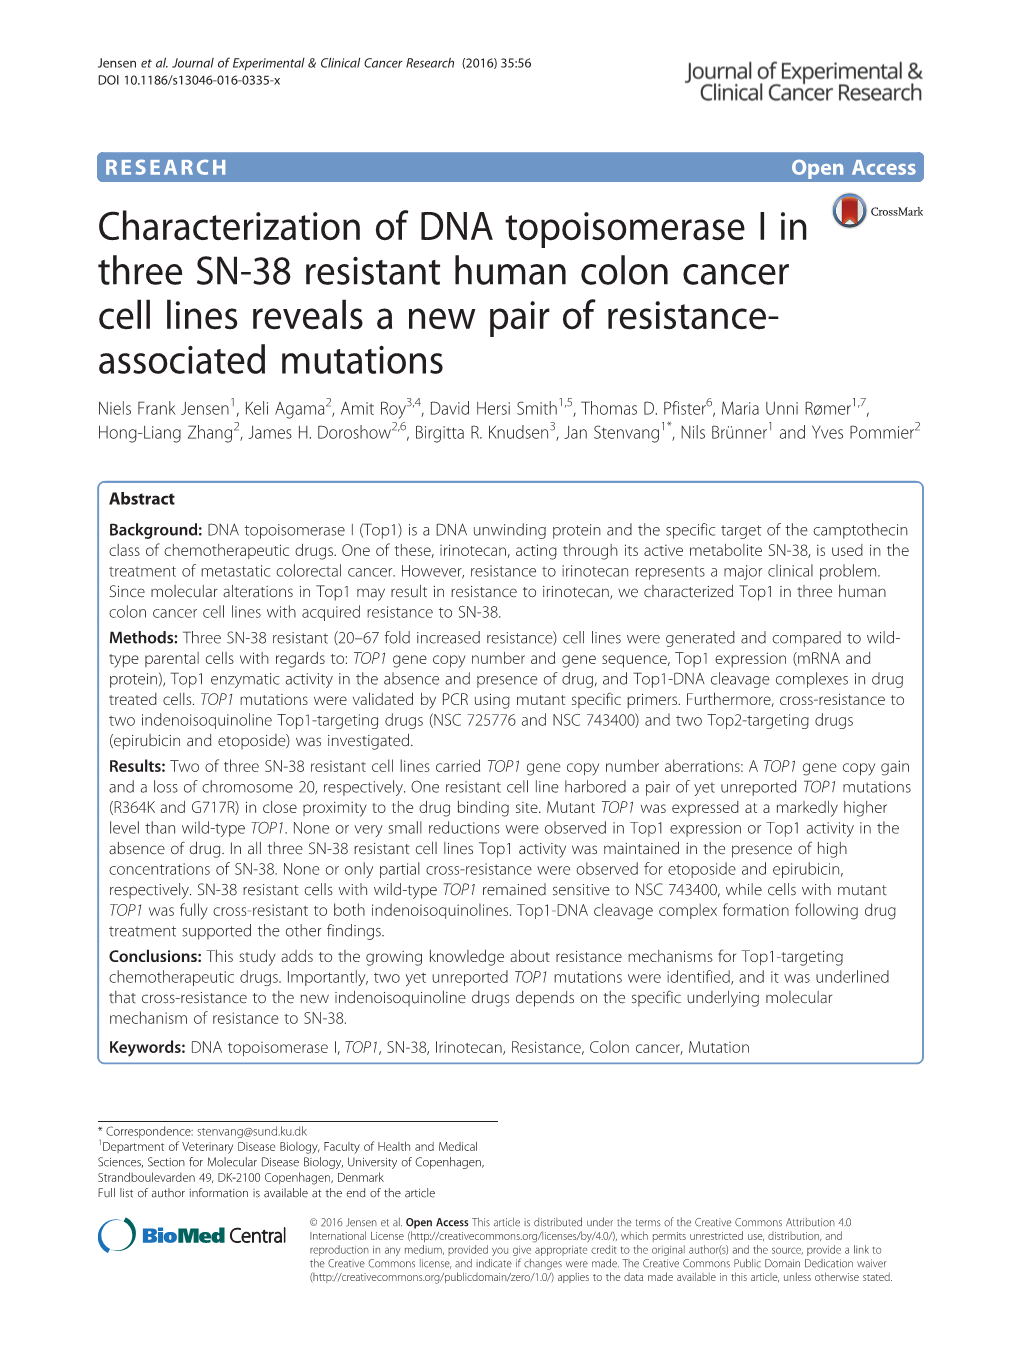 Characterization of DNA Topoisomerase I in Three SN-38 Resistant Human Colon Cancer Cell Lines Reveals a New Pair of Resistance